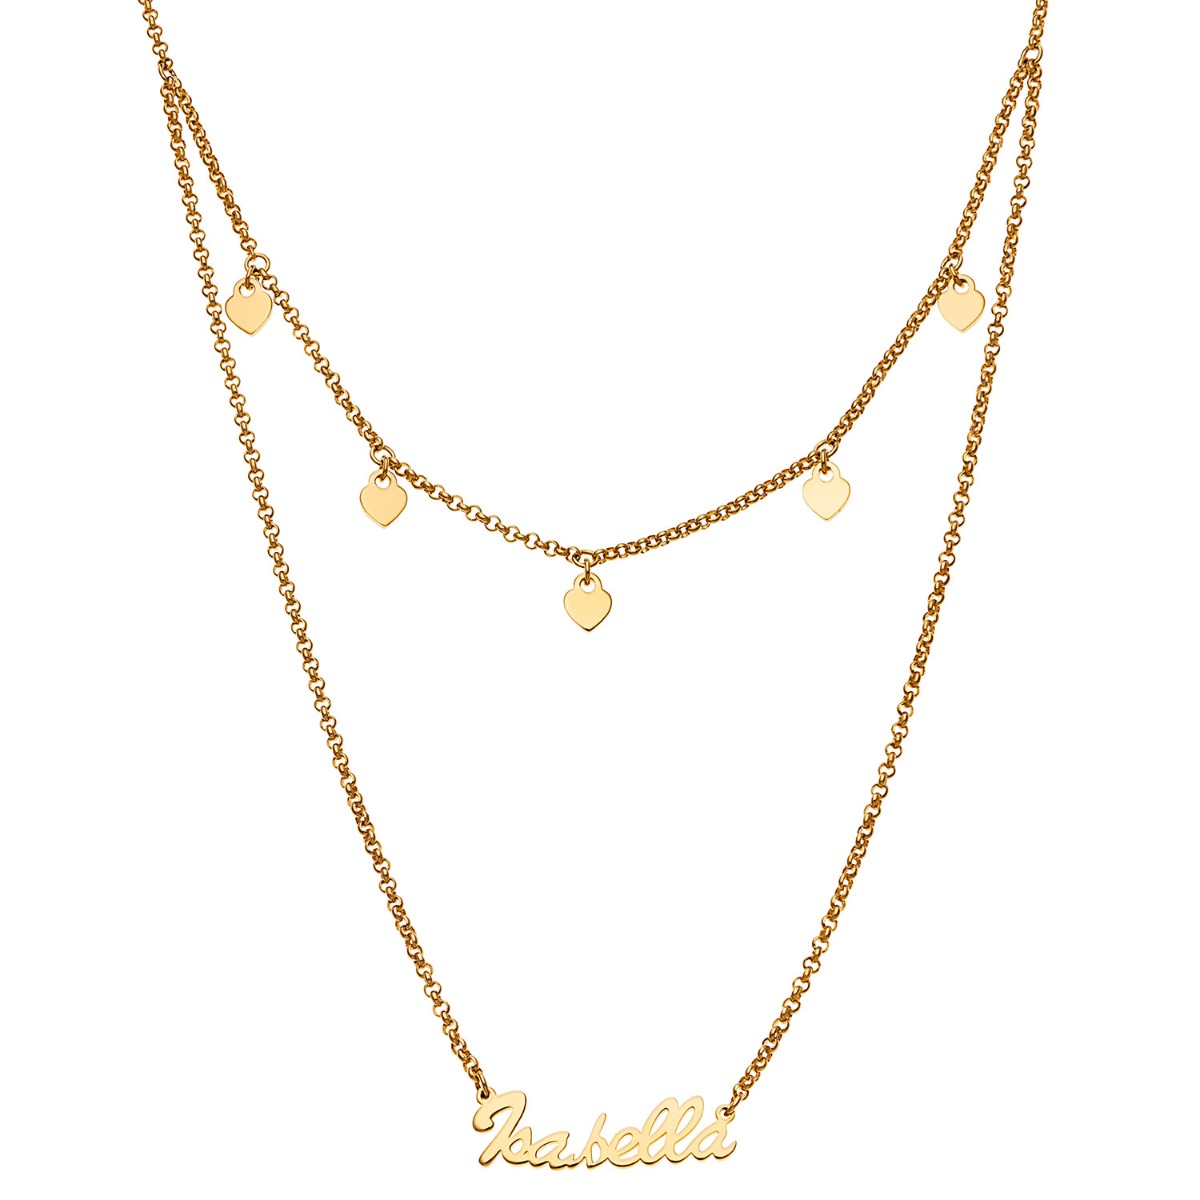 Goldtone Layered Name Necklace with Heart Charms